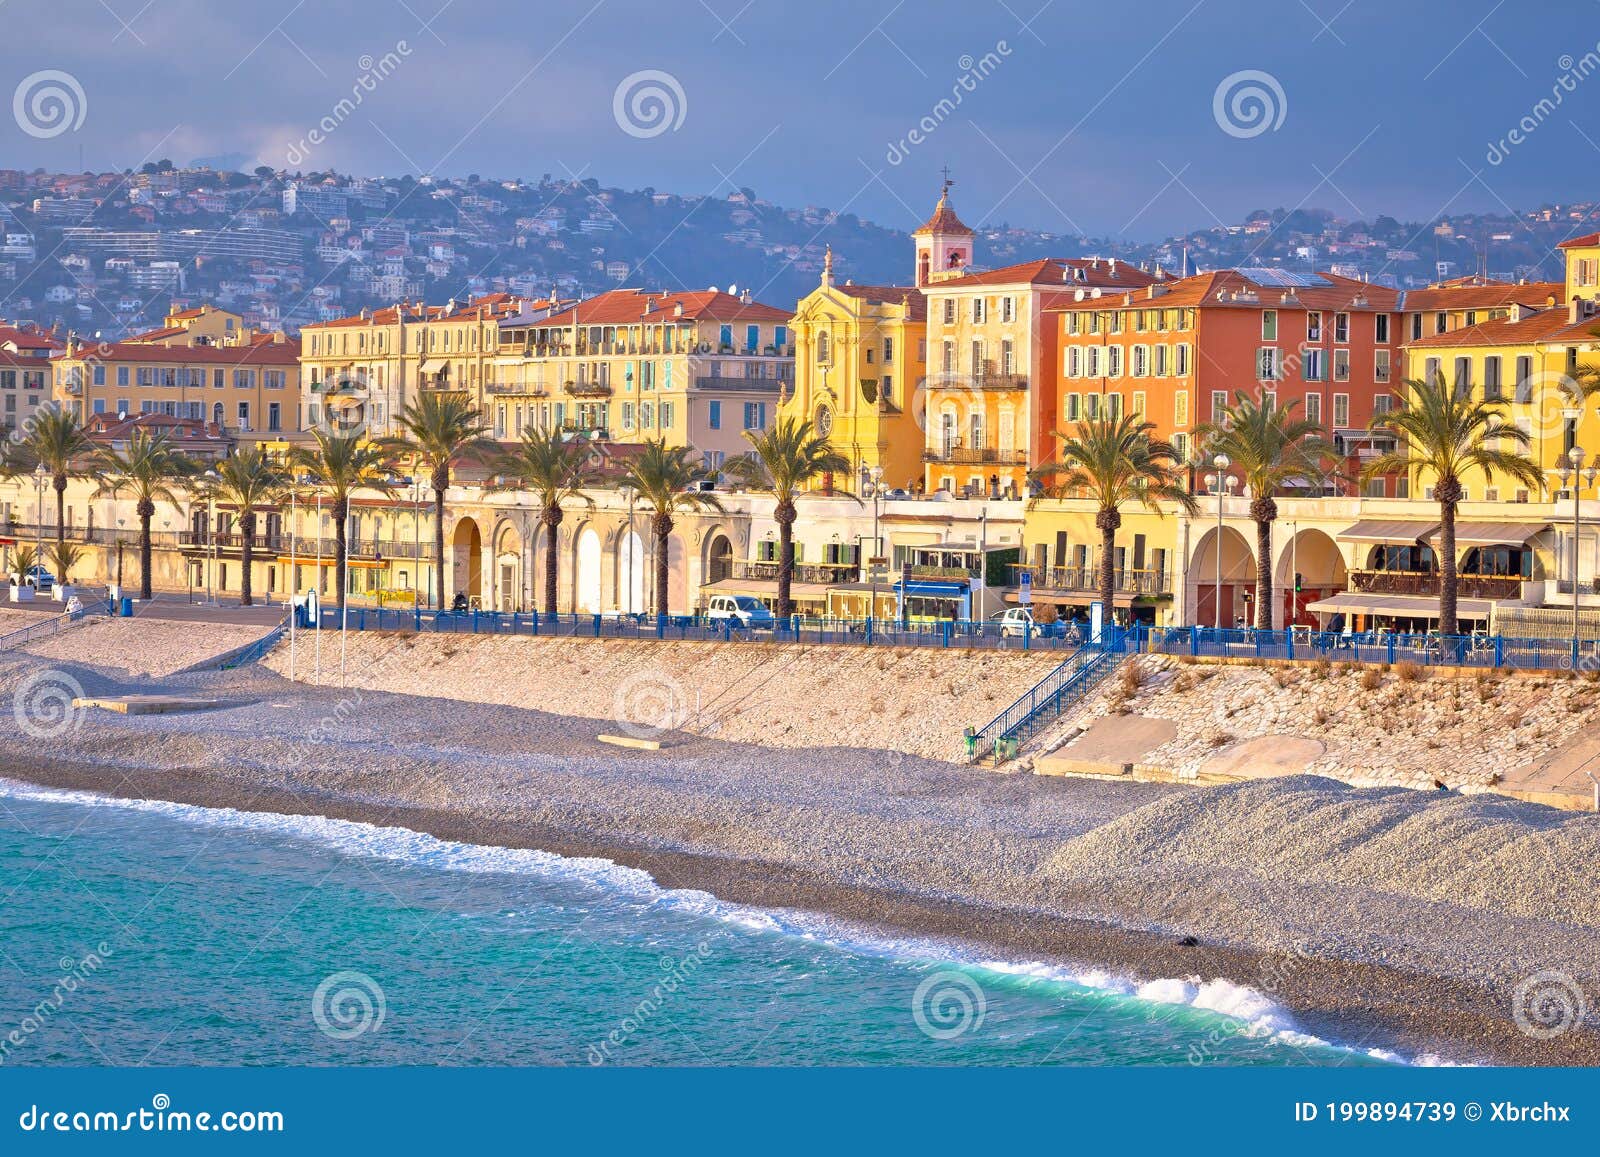 city of nice promenade des anglais and waterfront view, french riviera